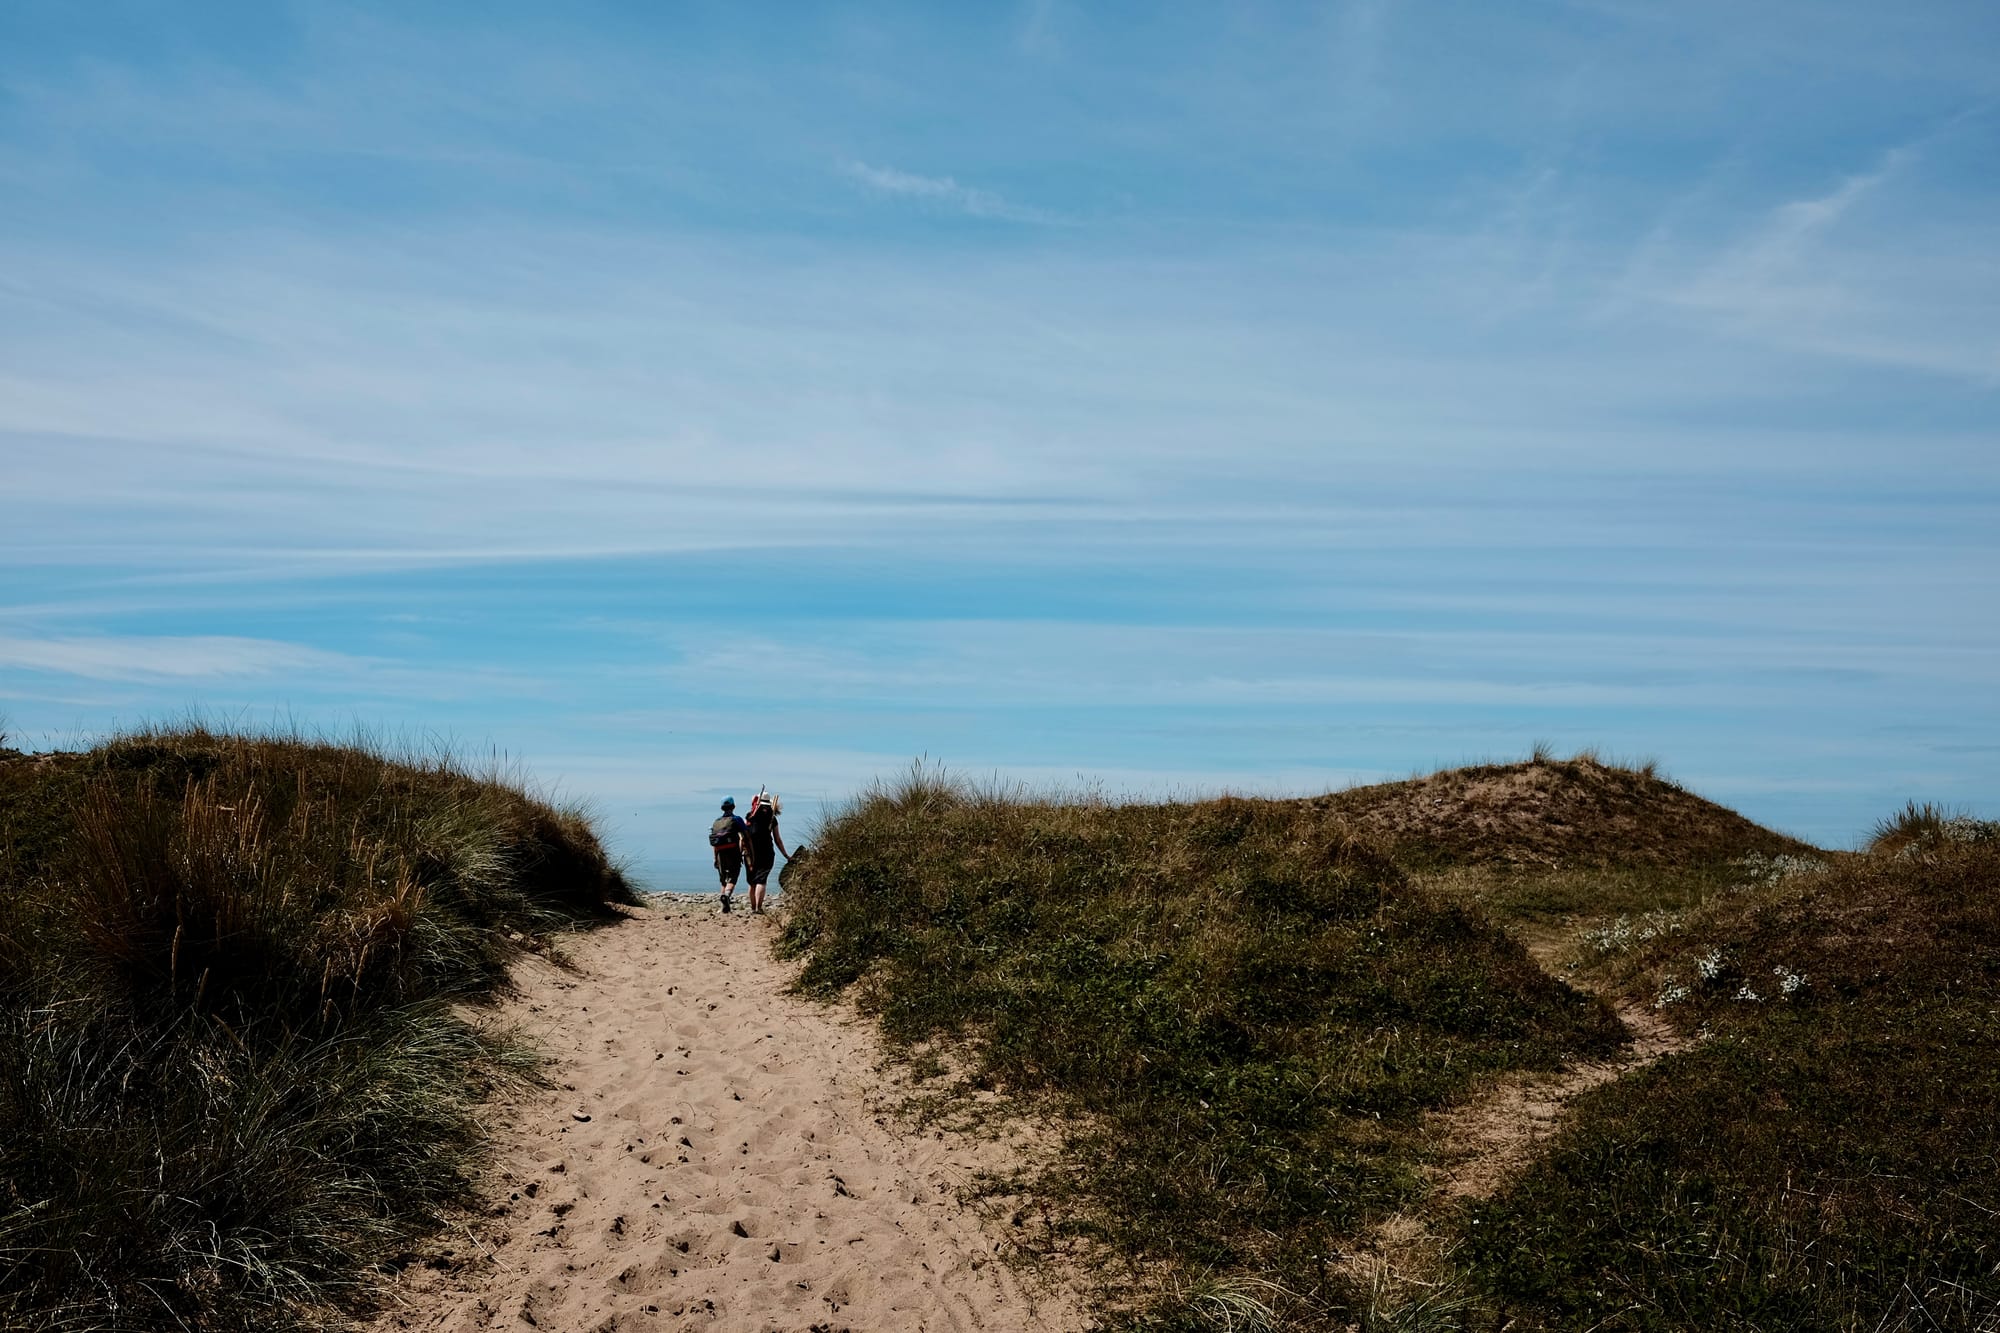 Two people walk on a yellow sandy path through the grass-covered dunes, blue sky above.